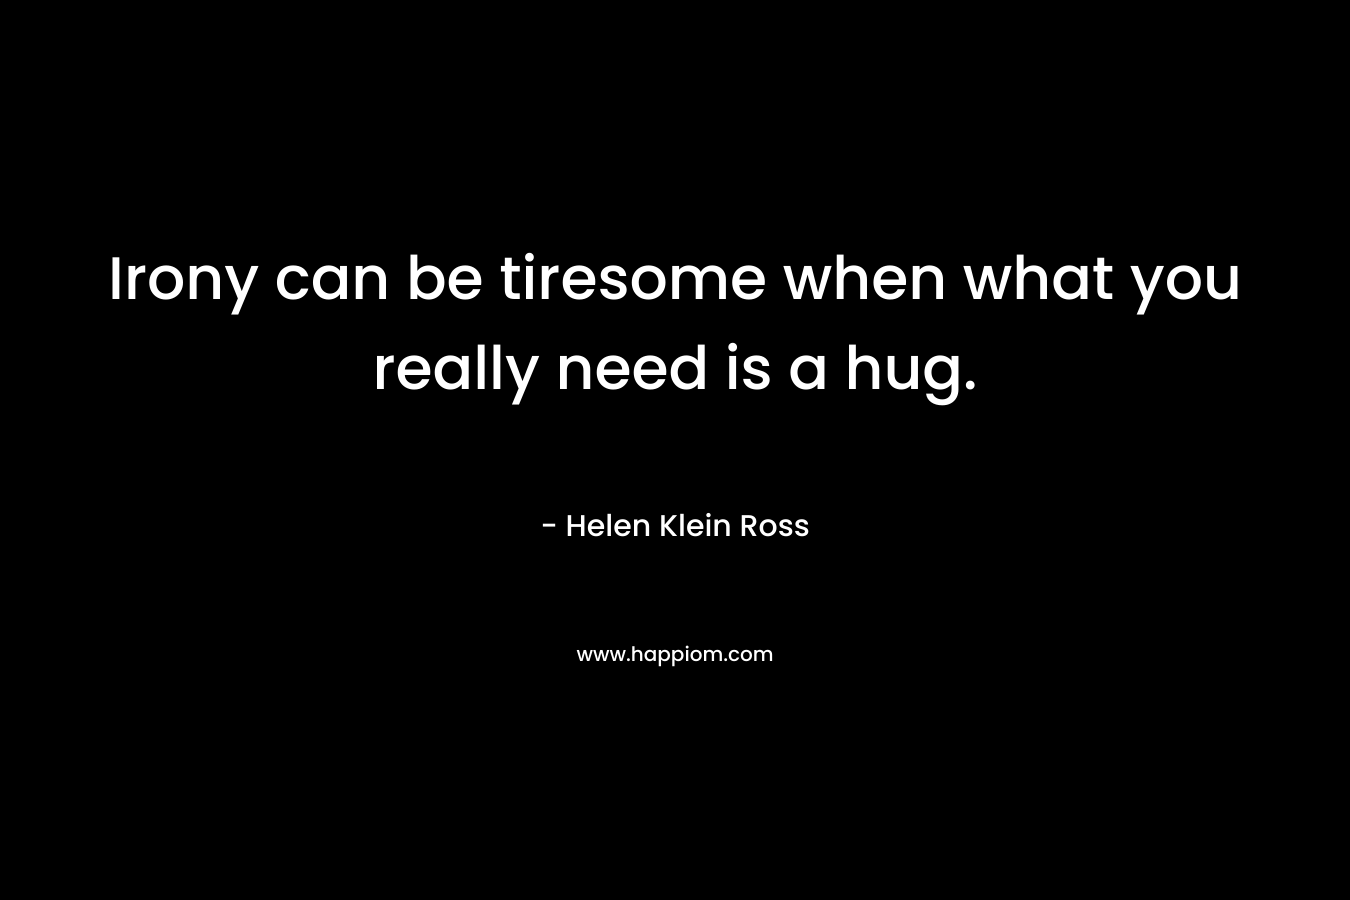 Irony can be tiresome when what you really need is a hug. – Helen Klein Ross